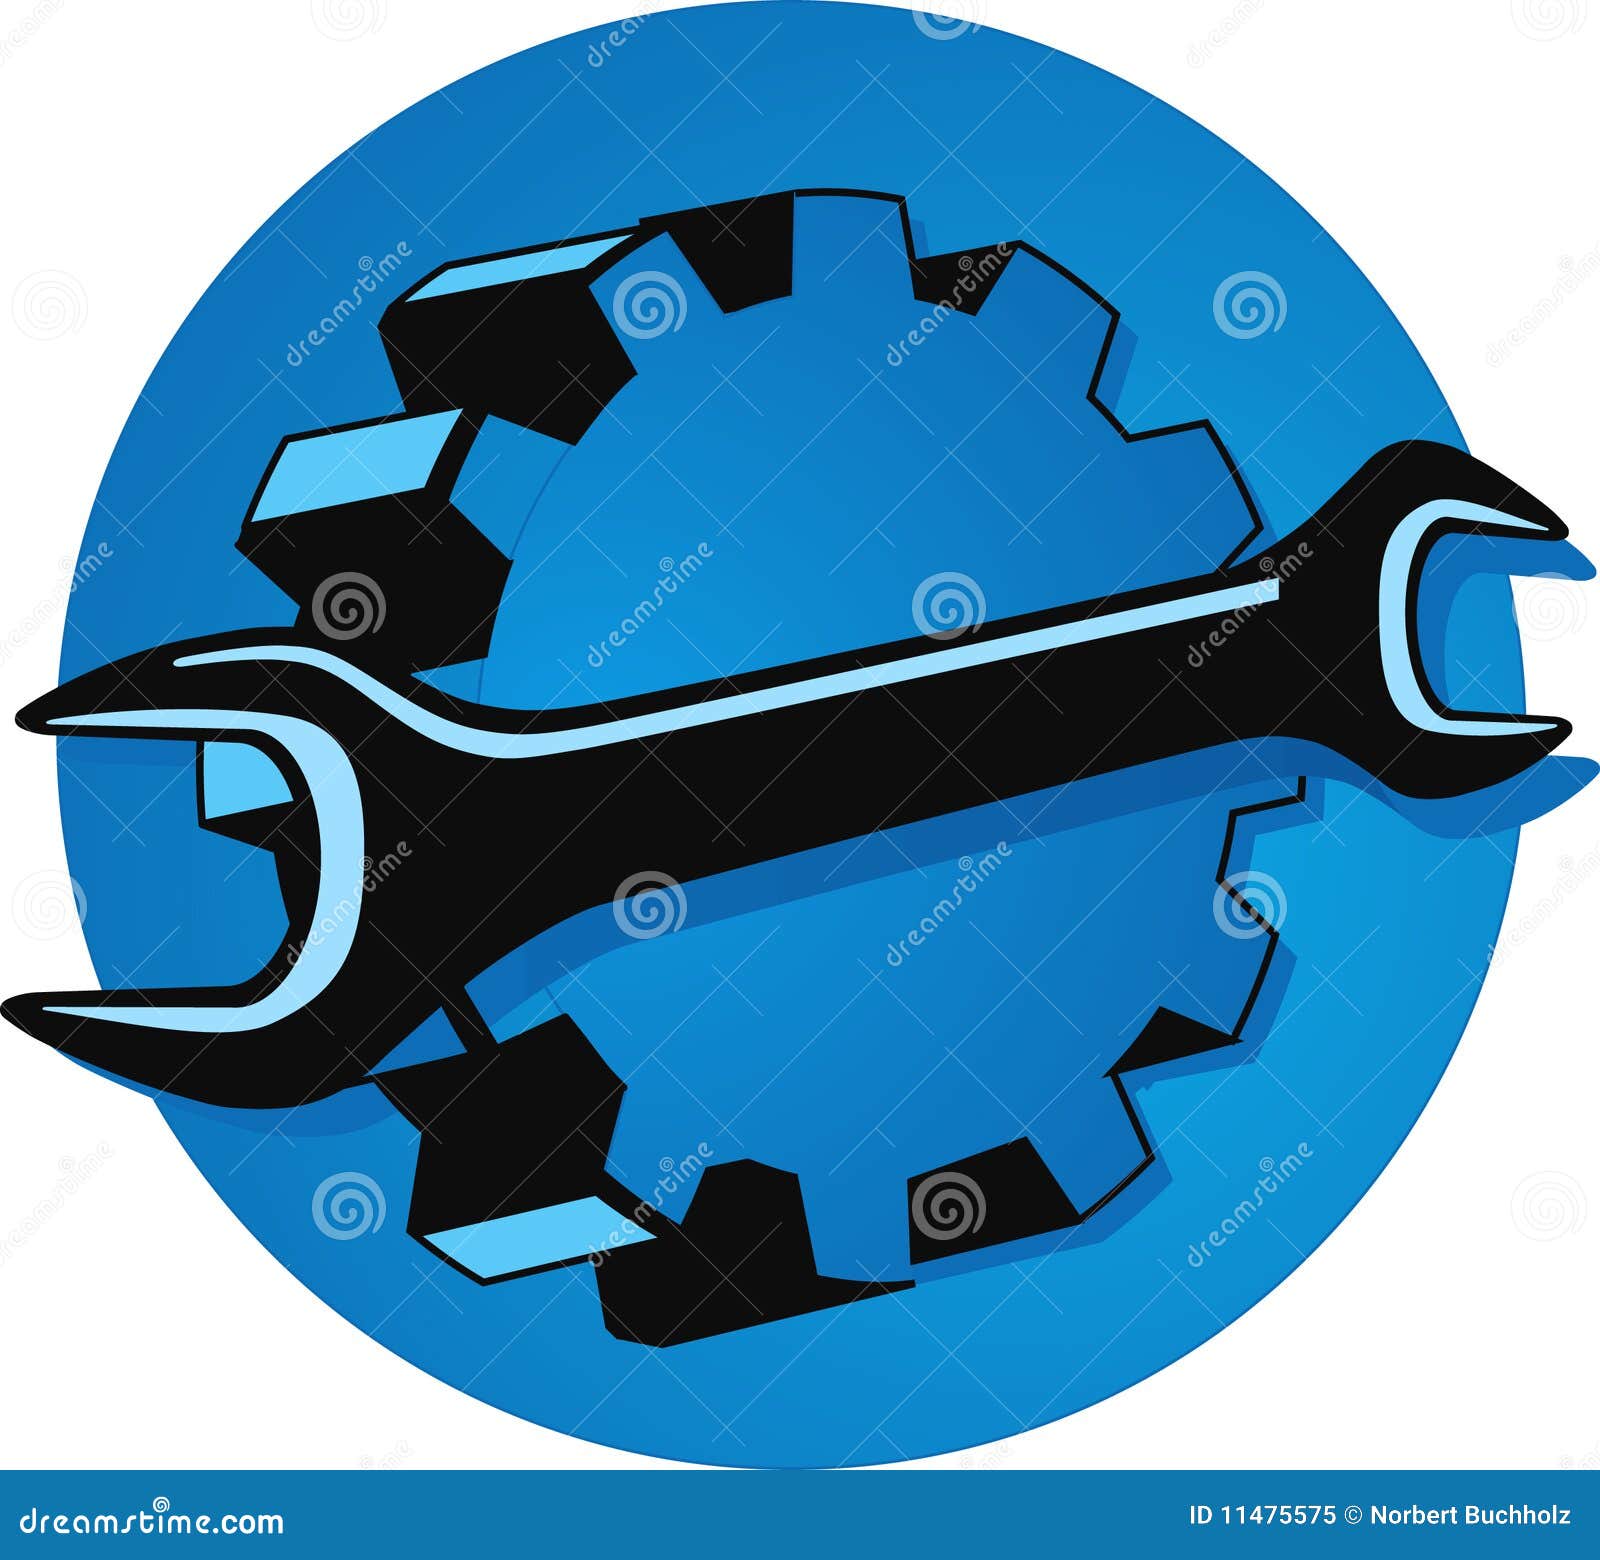 clipart engineering designs - photo #22